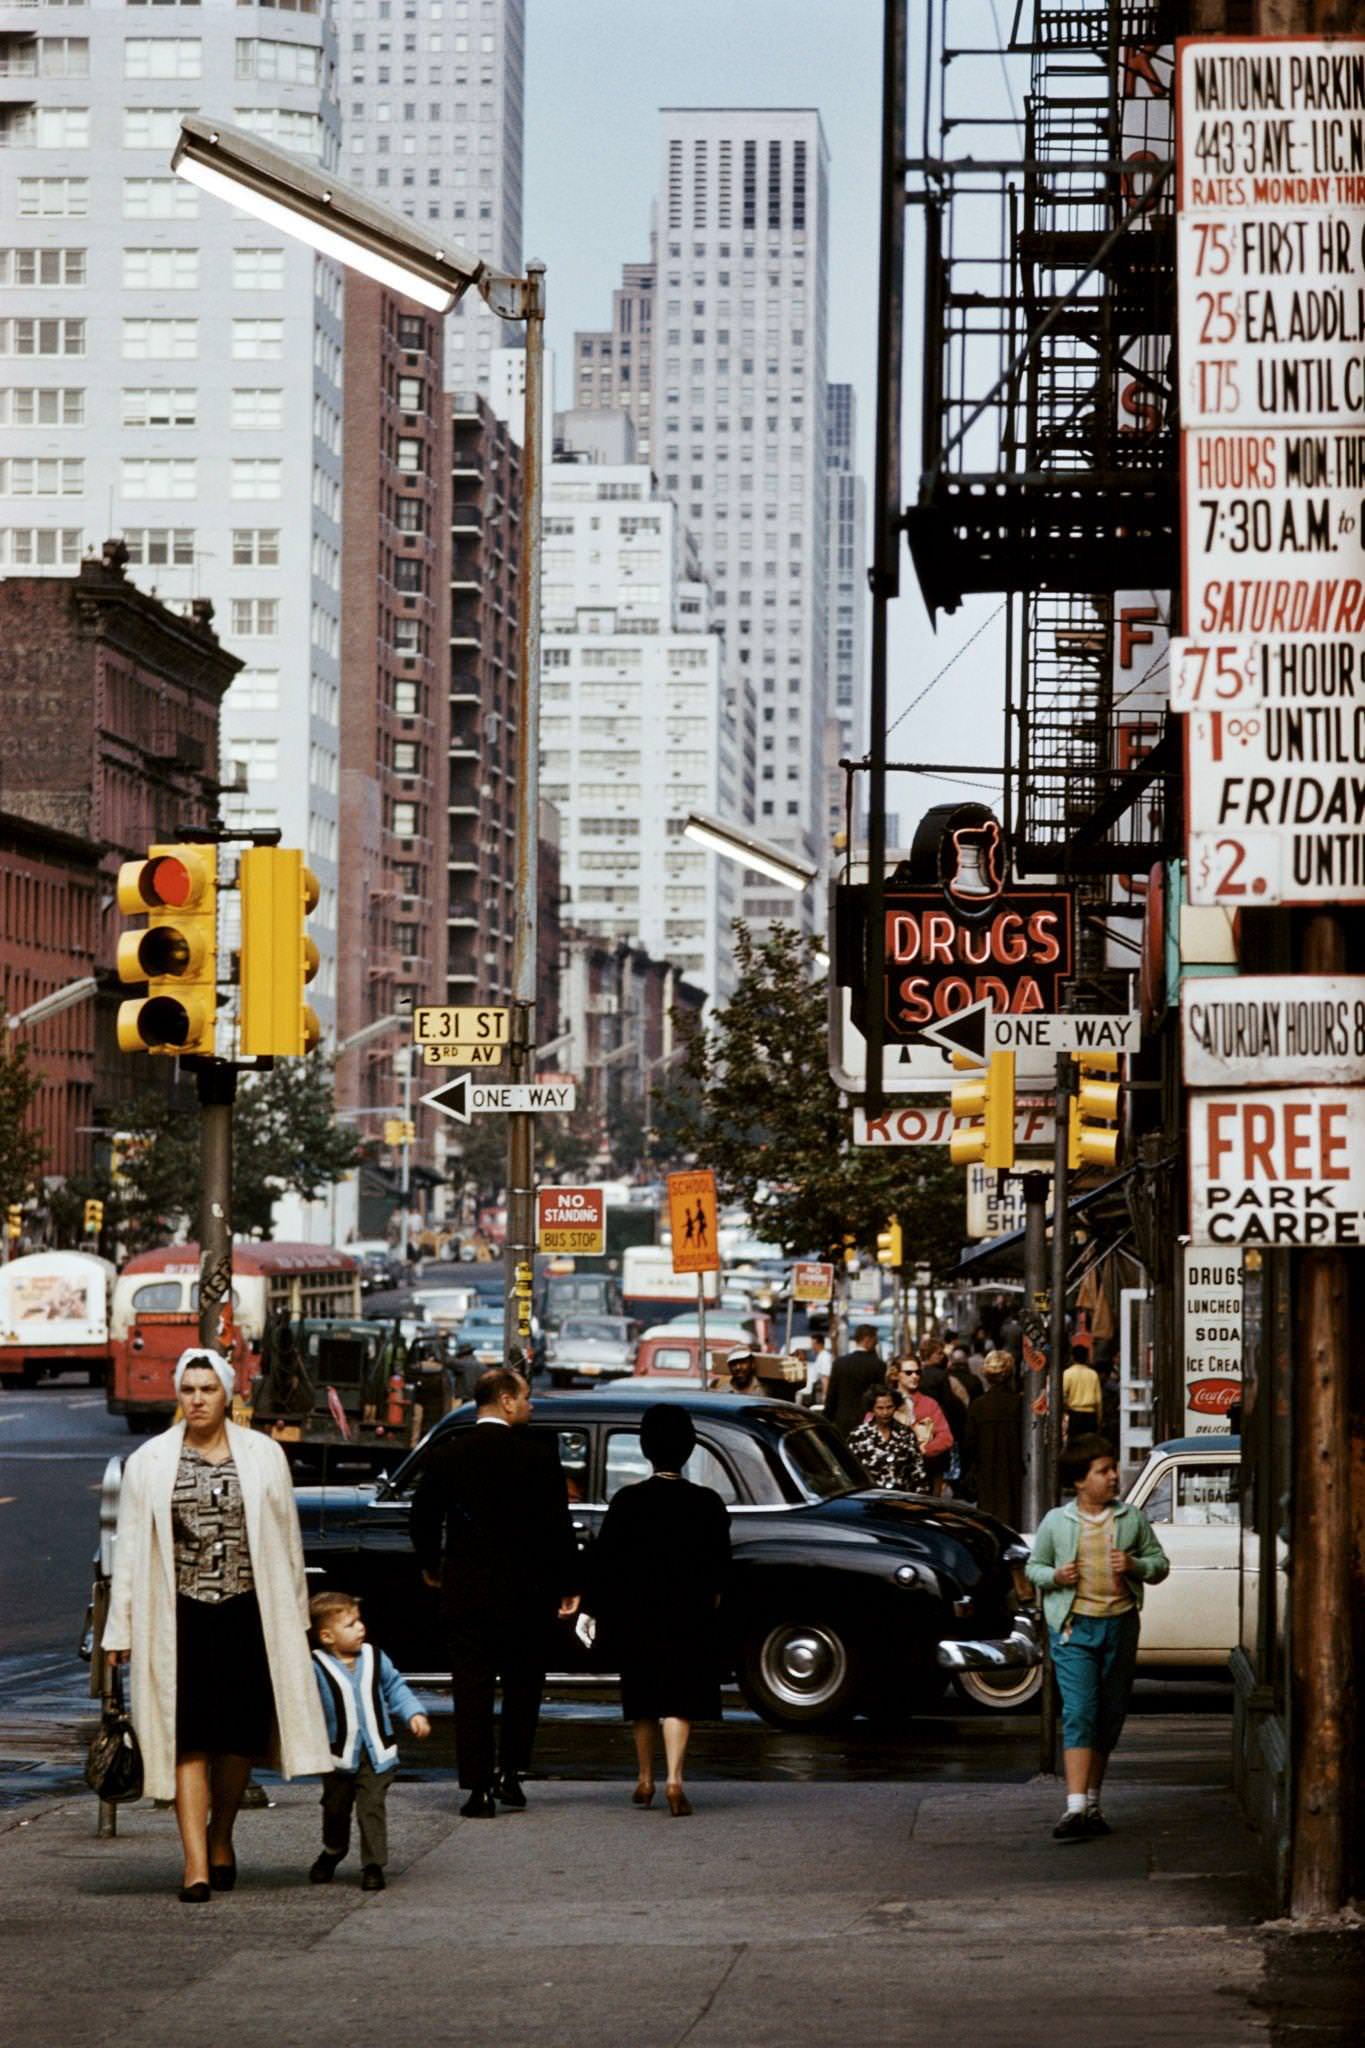 Junction Of East 31St Street And Third Avenue, Manhattan, 1962